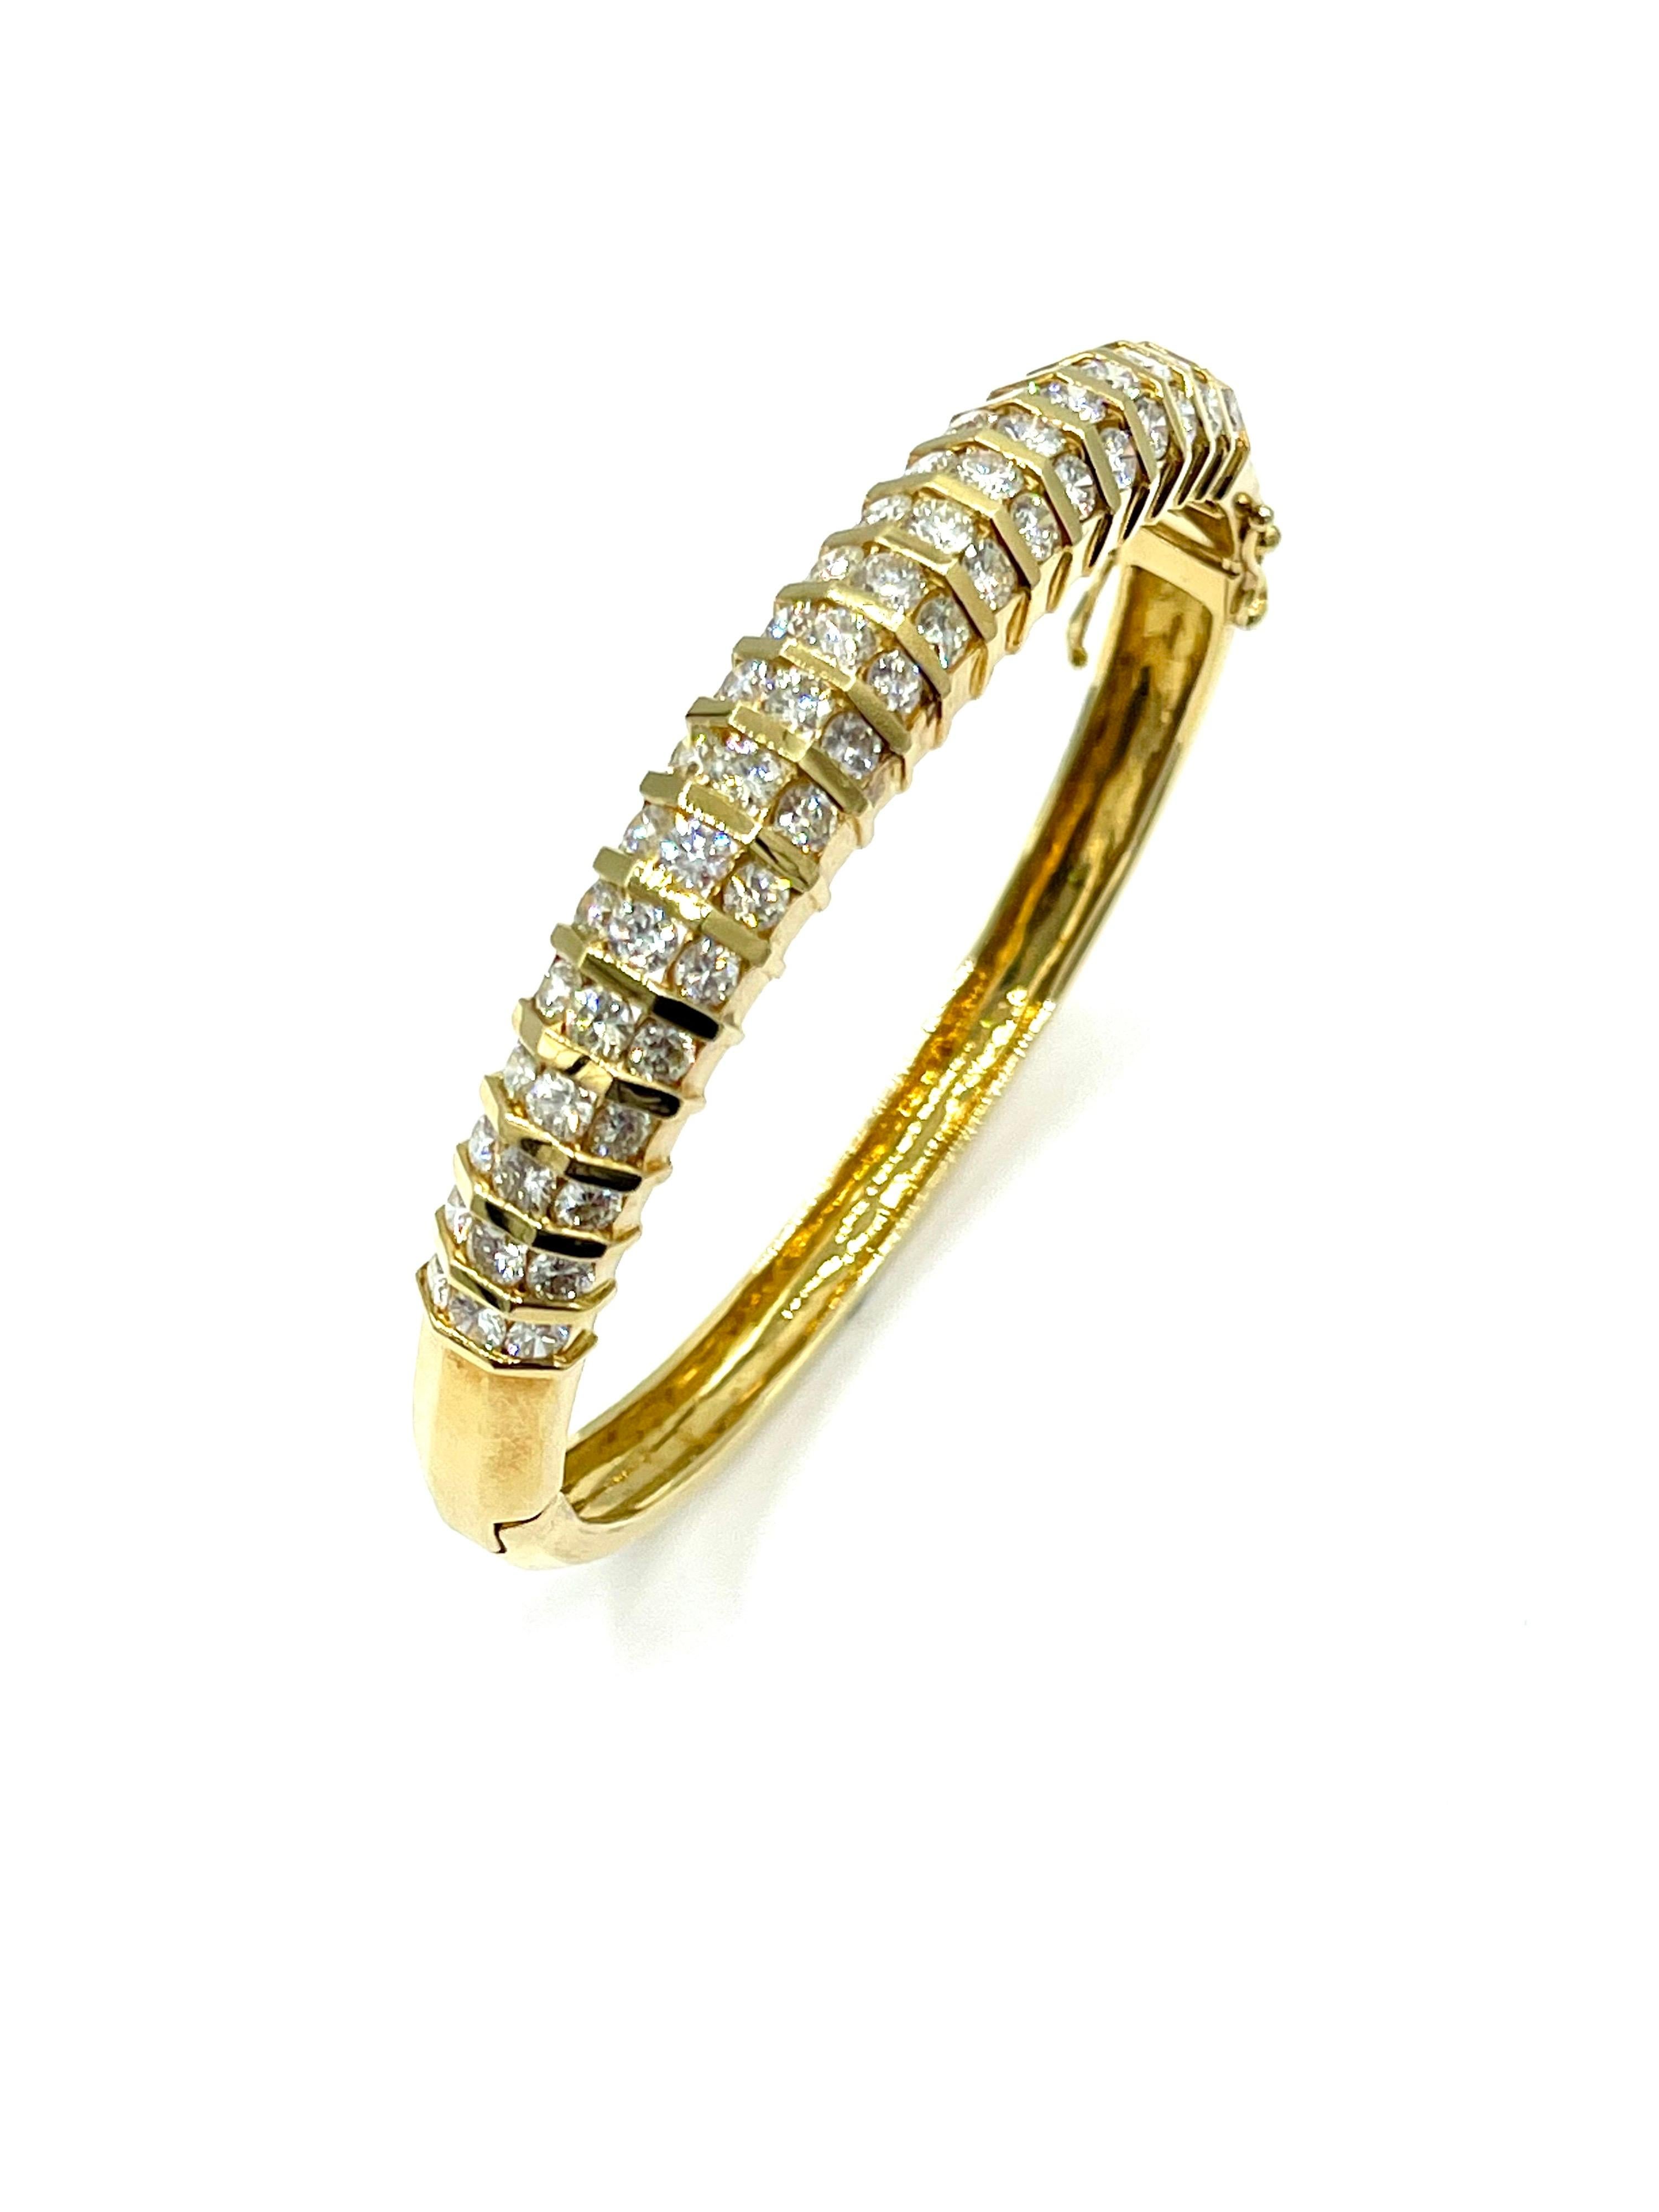 This is a beautiful retro style Diamond bangle bracelet!  The 57 round brilliant Diamonds are bar set in 18K yellow gold, with a total weight of 5.32 carats.  The diamonds are graded as G-H color, VS clarity.  These Diamonds have amazing fire to